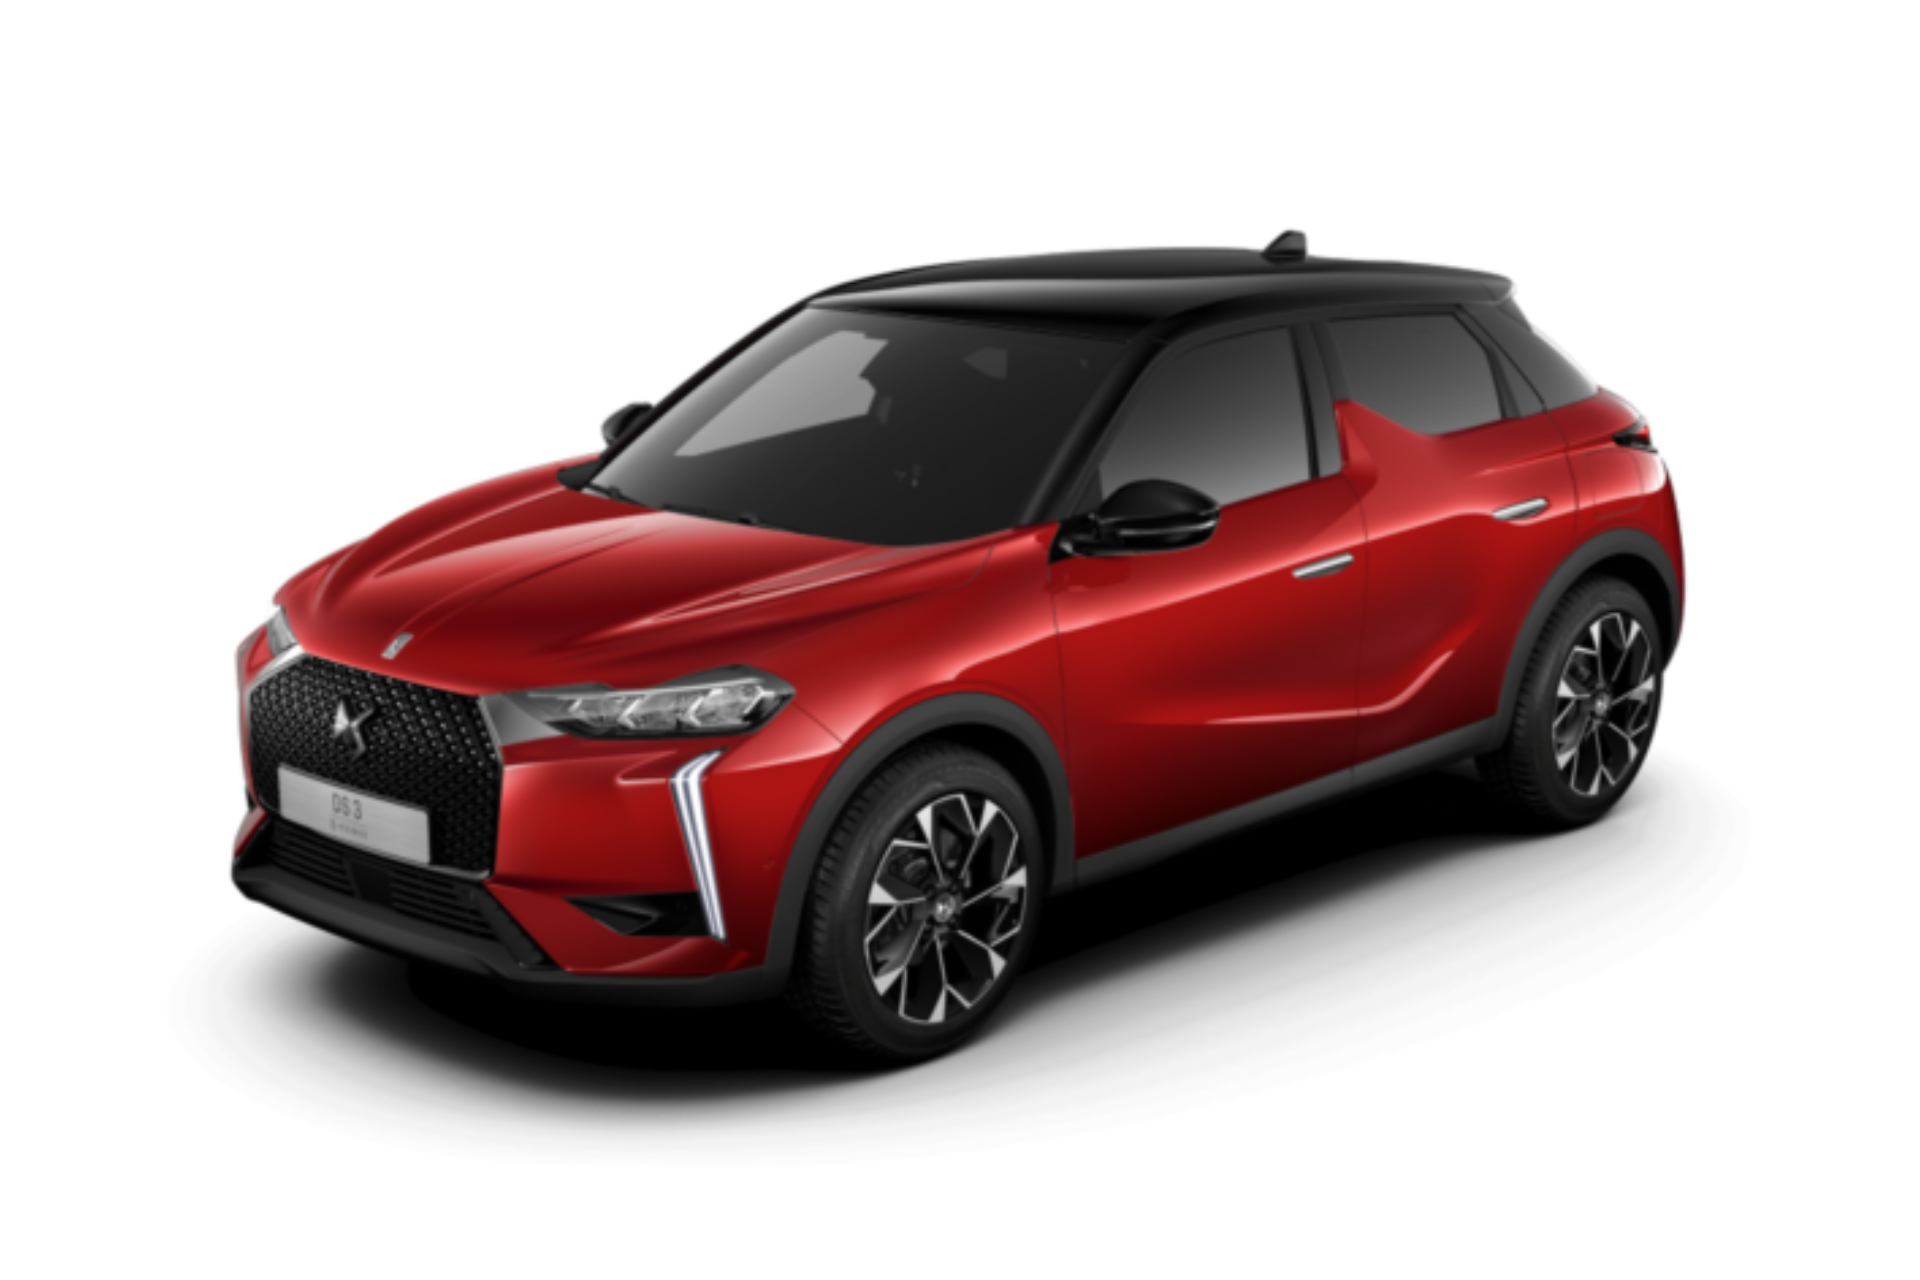 Charging your DS 3 Crossback e-Tense